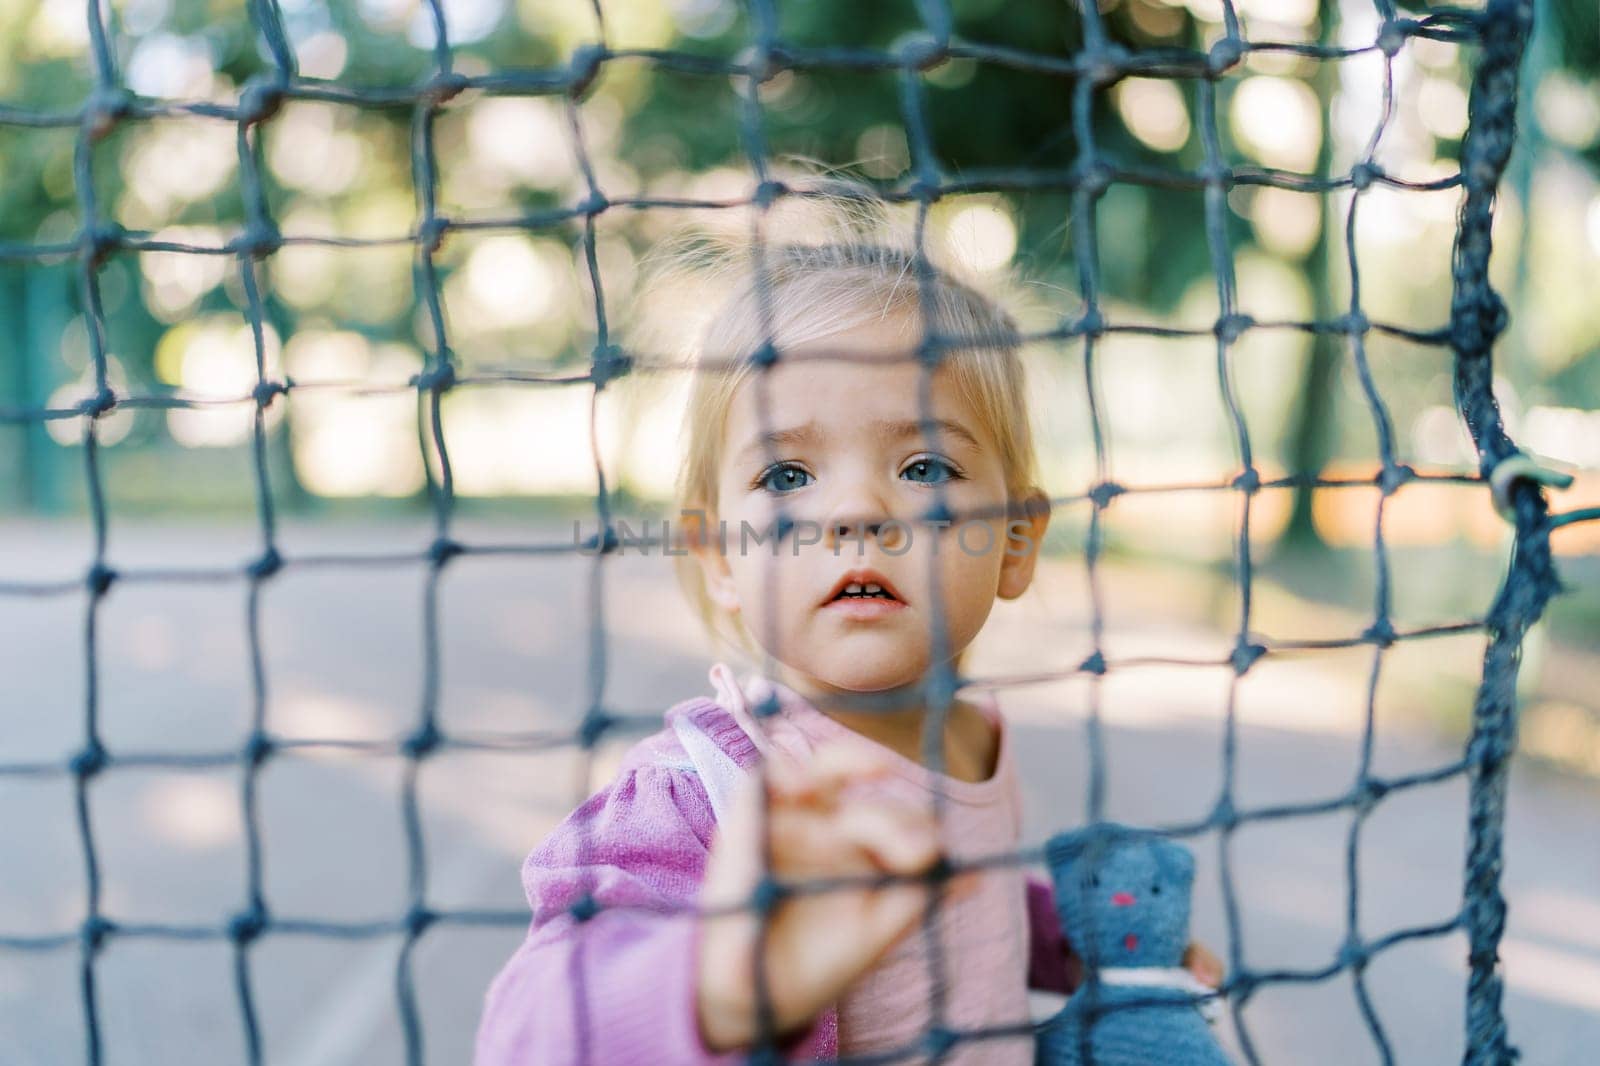 Little girl with a toy stands behind a tennis net, holding a cell with her hand by Nadtochiy